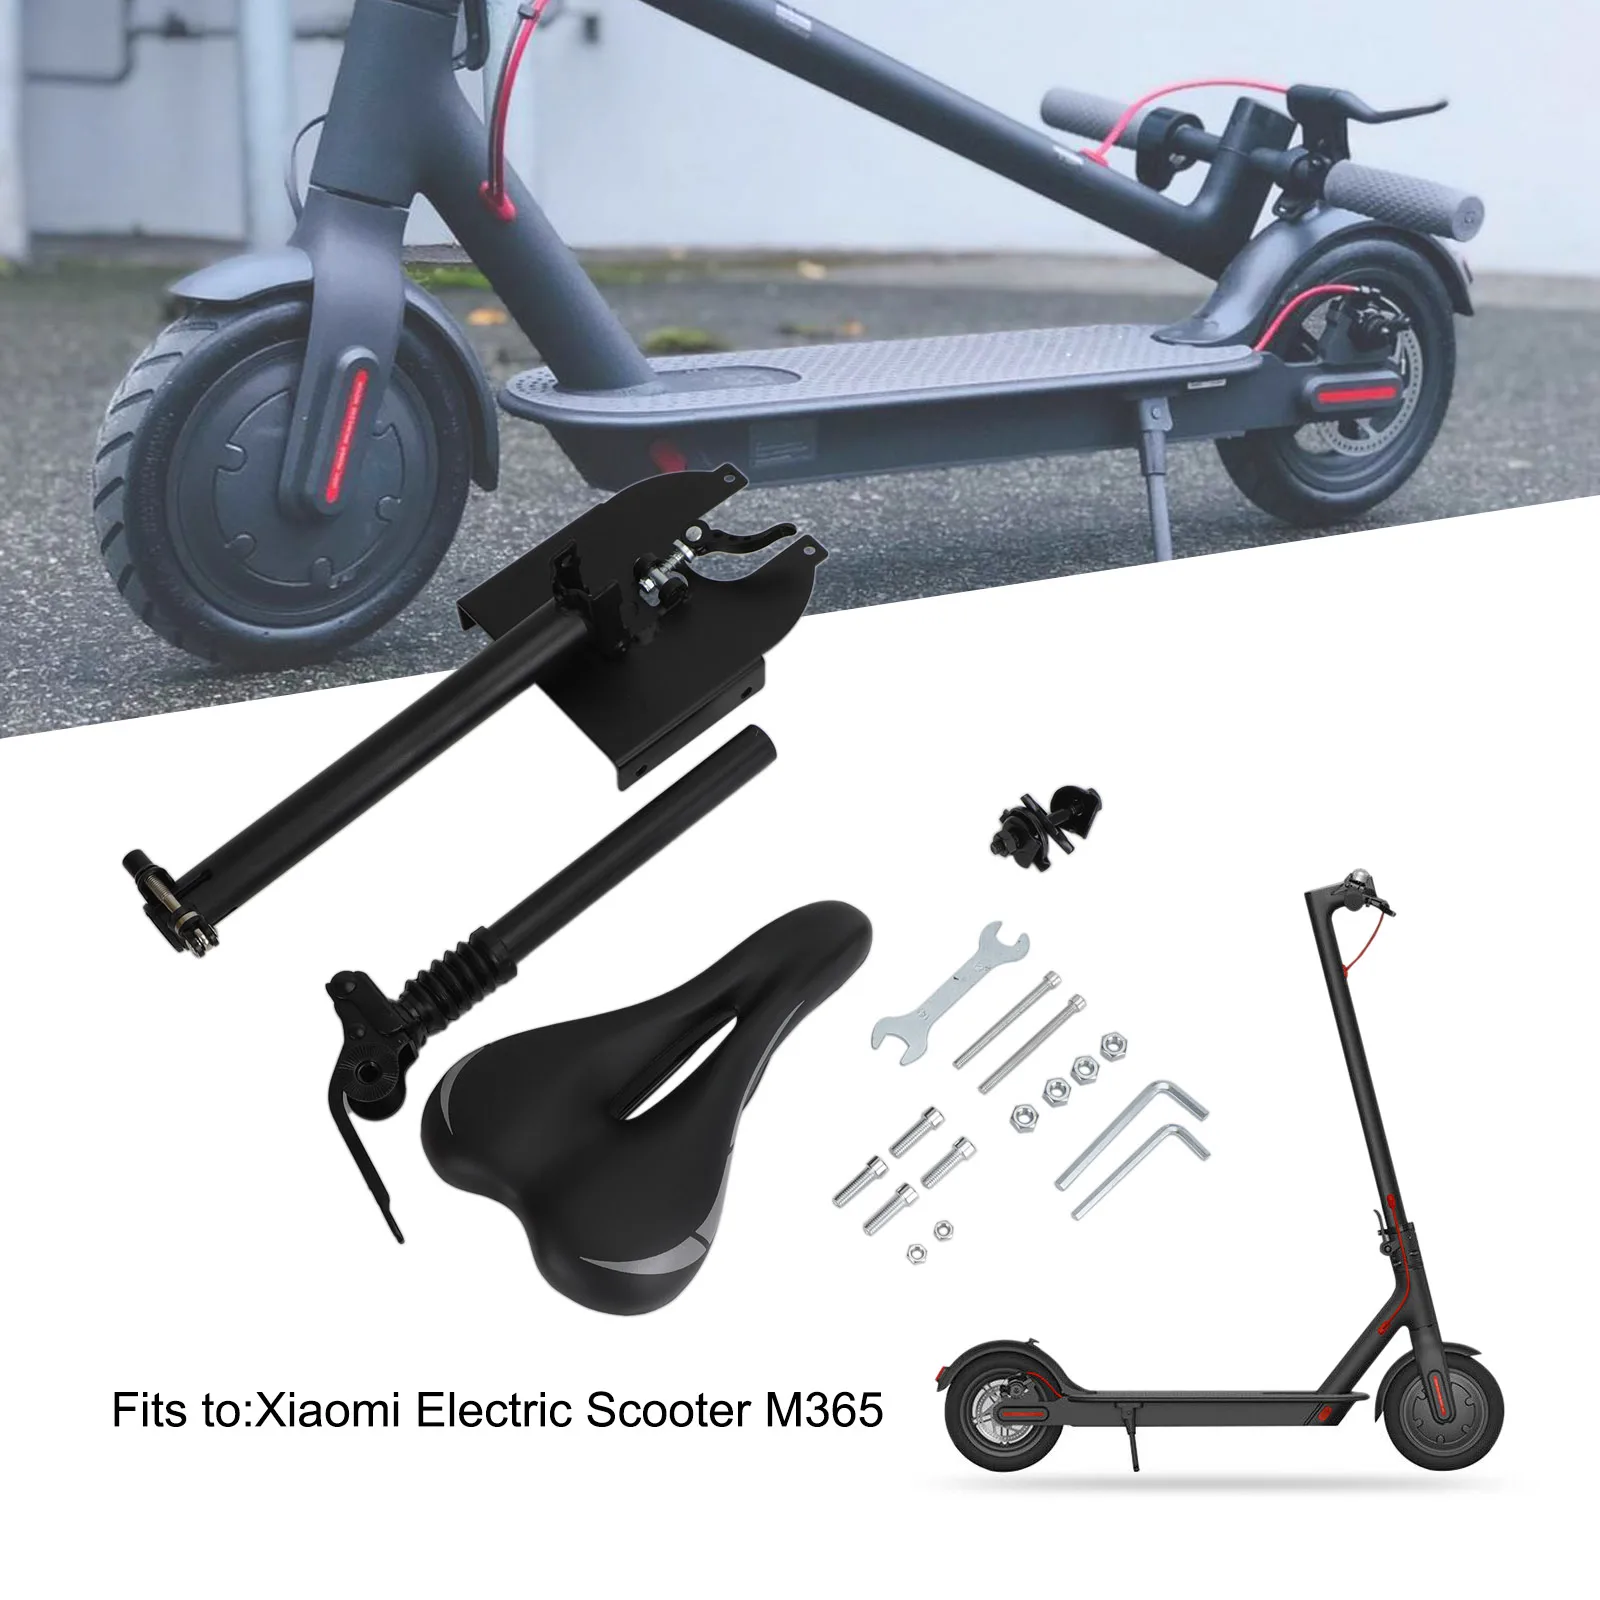 

Foldable Electric Scooter Seat Adjustable Skateboard Saddle for Xiaomi M365 E-Scooter Accessories